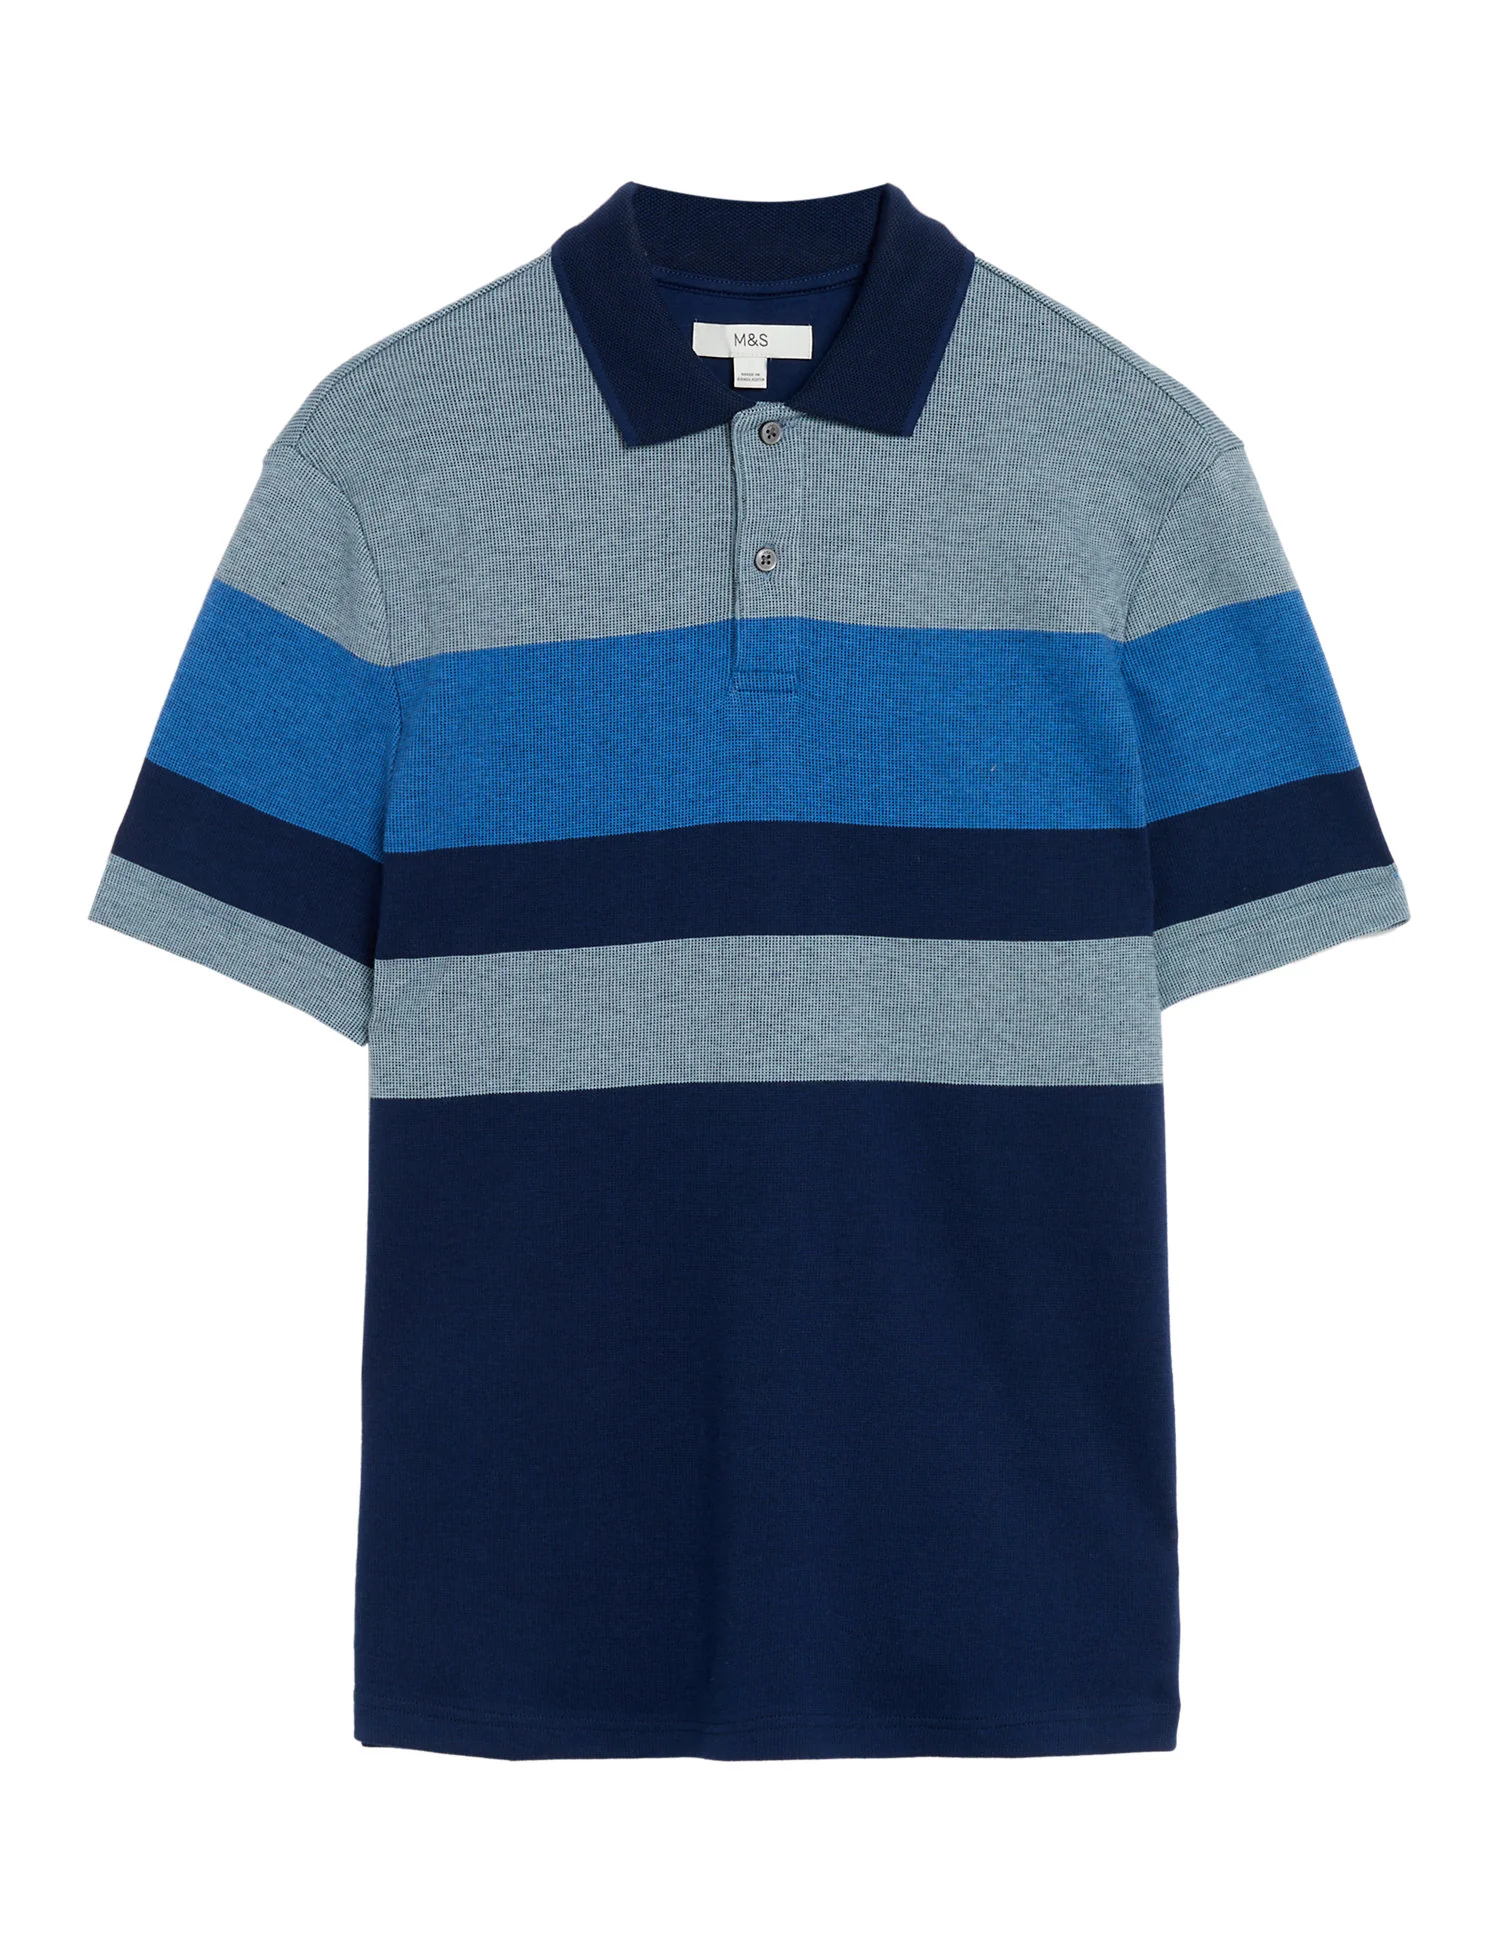 Pure Cotton Double Knit Striped Polo Shirt ₱3,150.00 now P2,677.50.jpg